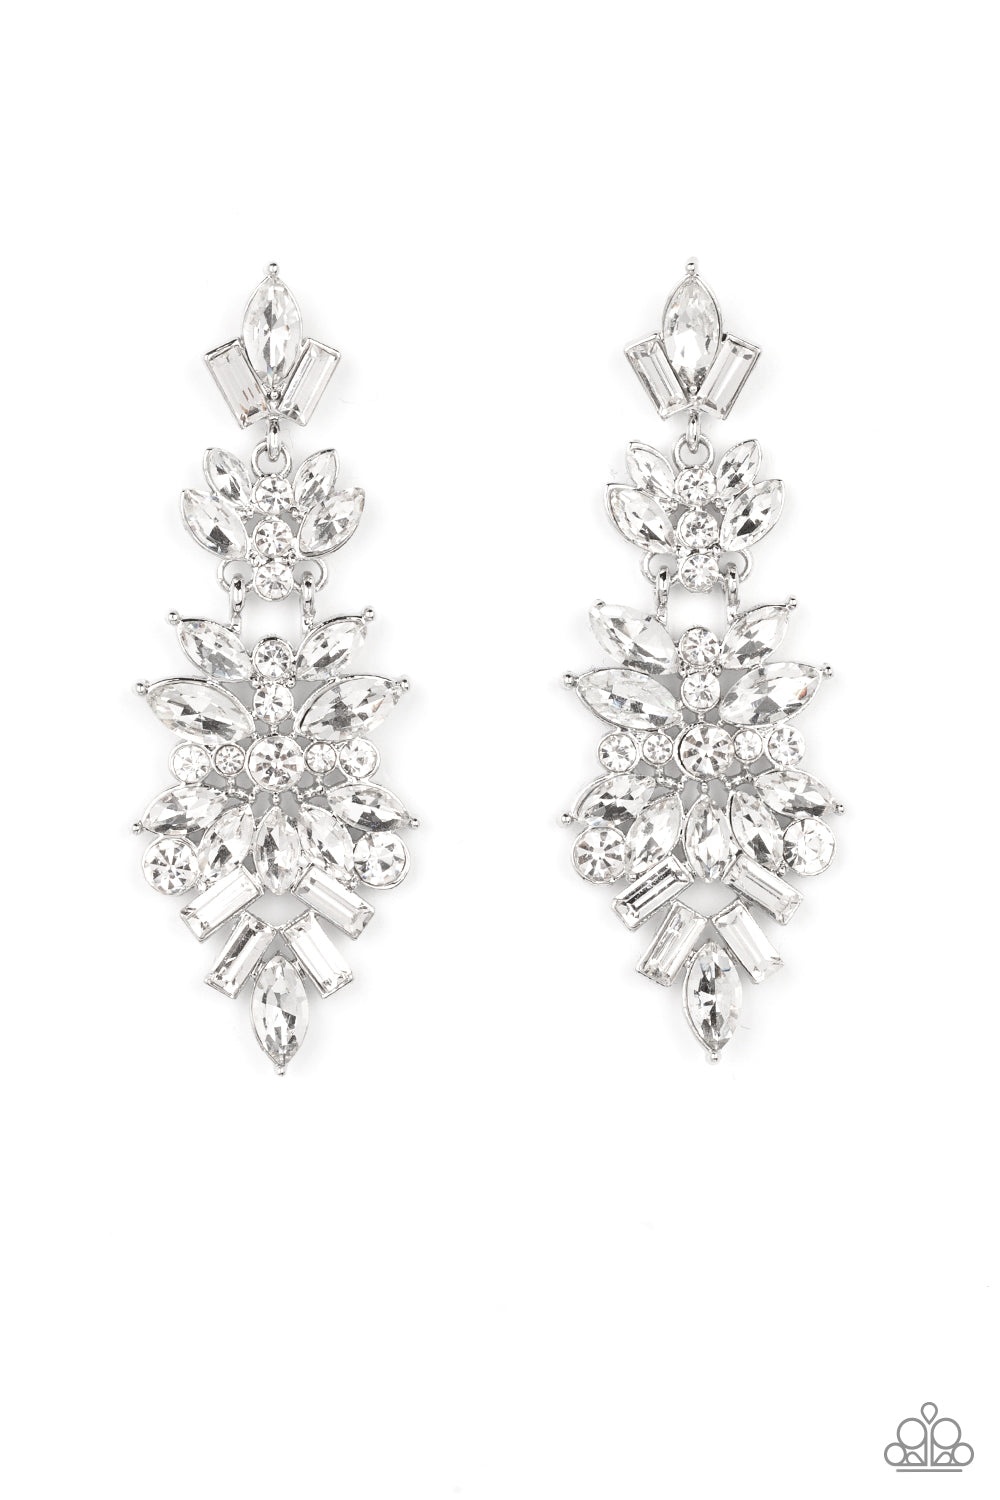 Frozen Fairytale White Earrings May 2022 Life of the Party Exclusive - Princess Glam Shop